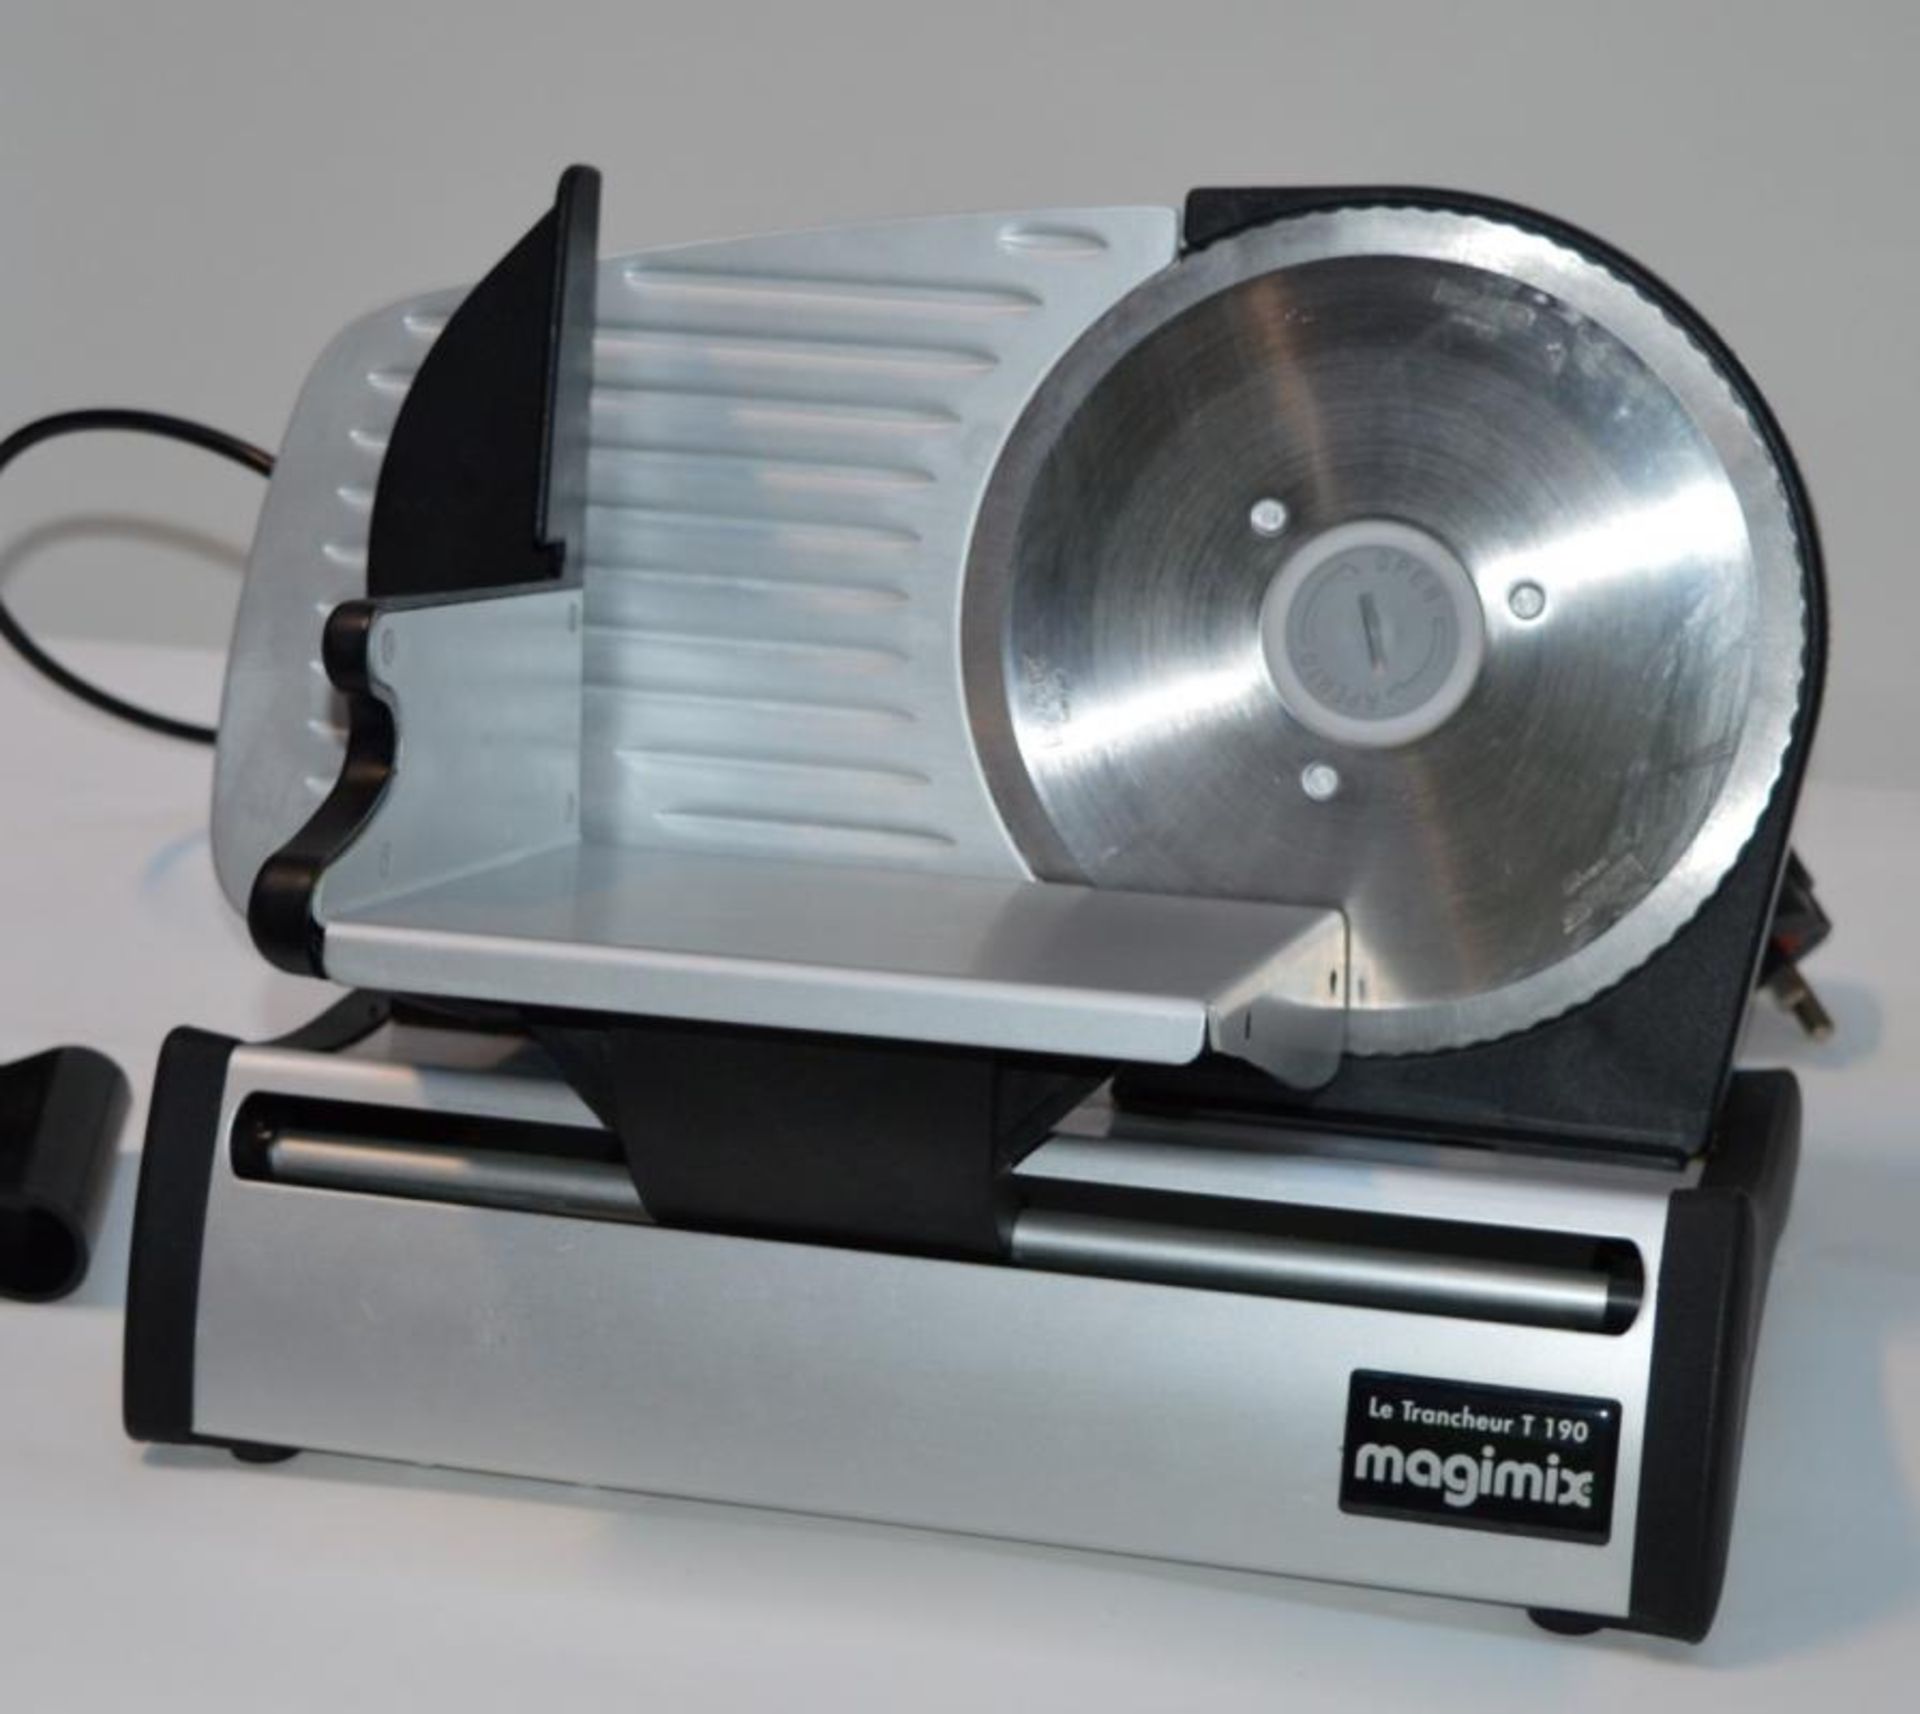 1 x Magimix 11650 T190 Stainless Steel Work Top Food Slicer - CL010 - Excellent Clean Condition - Id